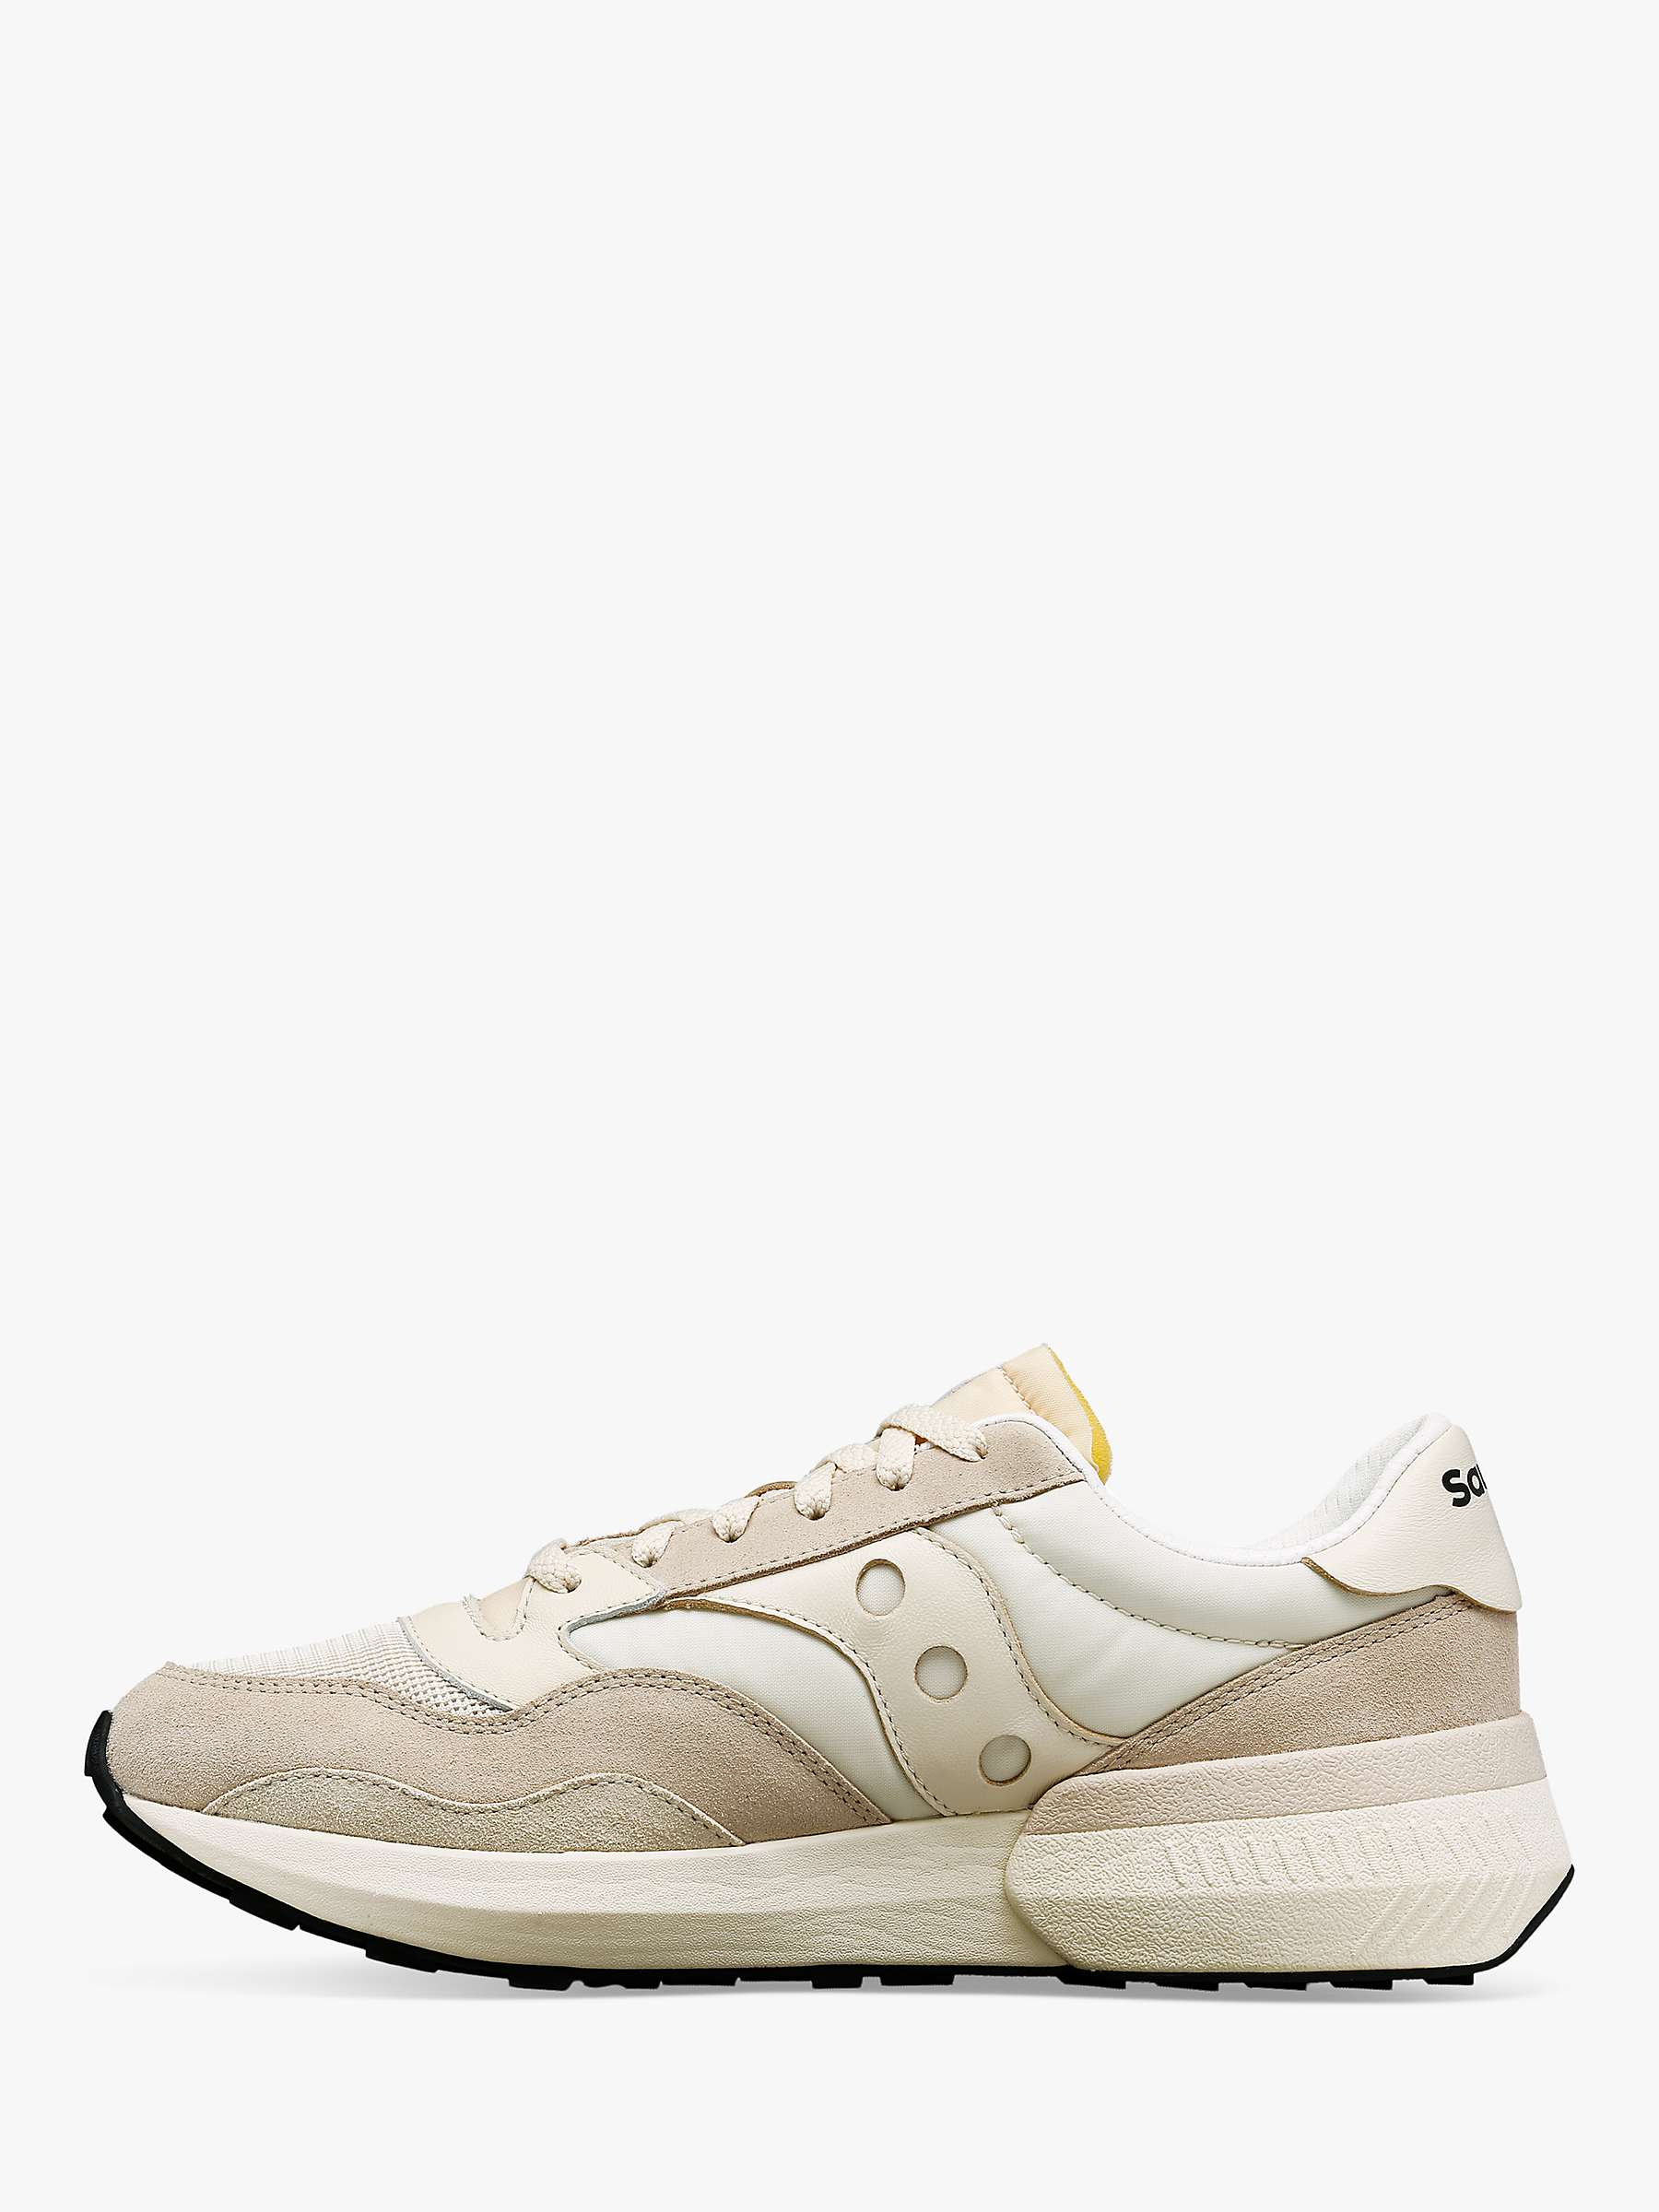 Buy Saucony Jazz NXT Lace Up Trainers Online at johnlewis.com